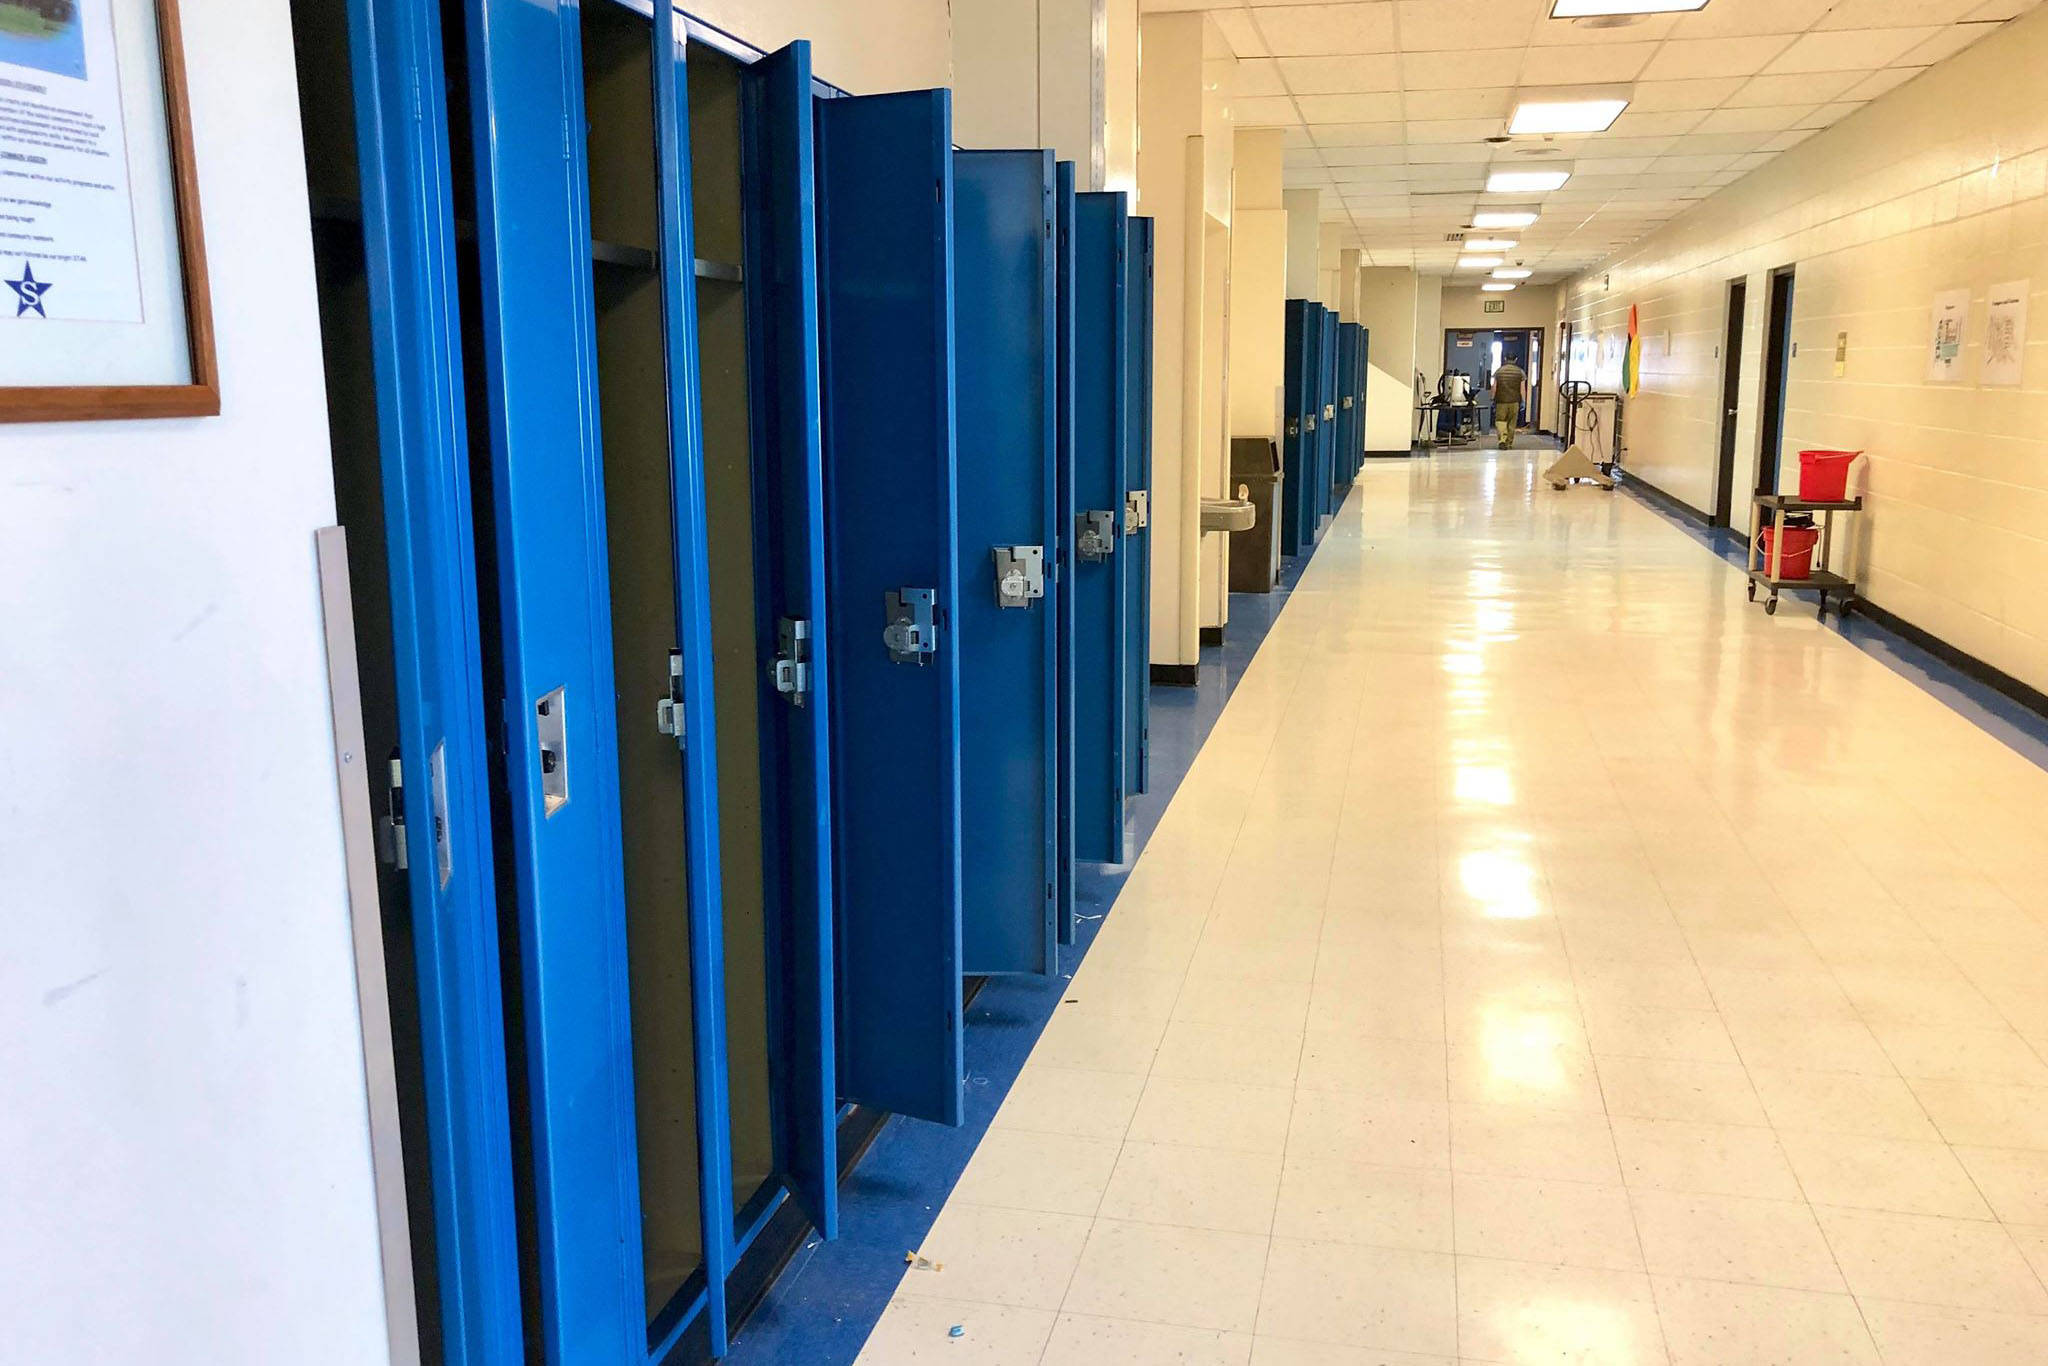 Lockers and hallways remain empty with schools closed across Alaska to slow the spread of COVID-19, the disease caused by the new coronavirus that has prompted a global pandemic, on Monday, April 6, 2020 in Soldotna, Alaska. (photo by Victoria Petersen/Peninsula Clarion)